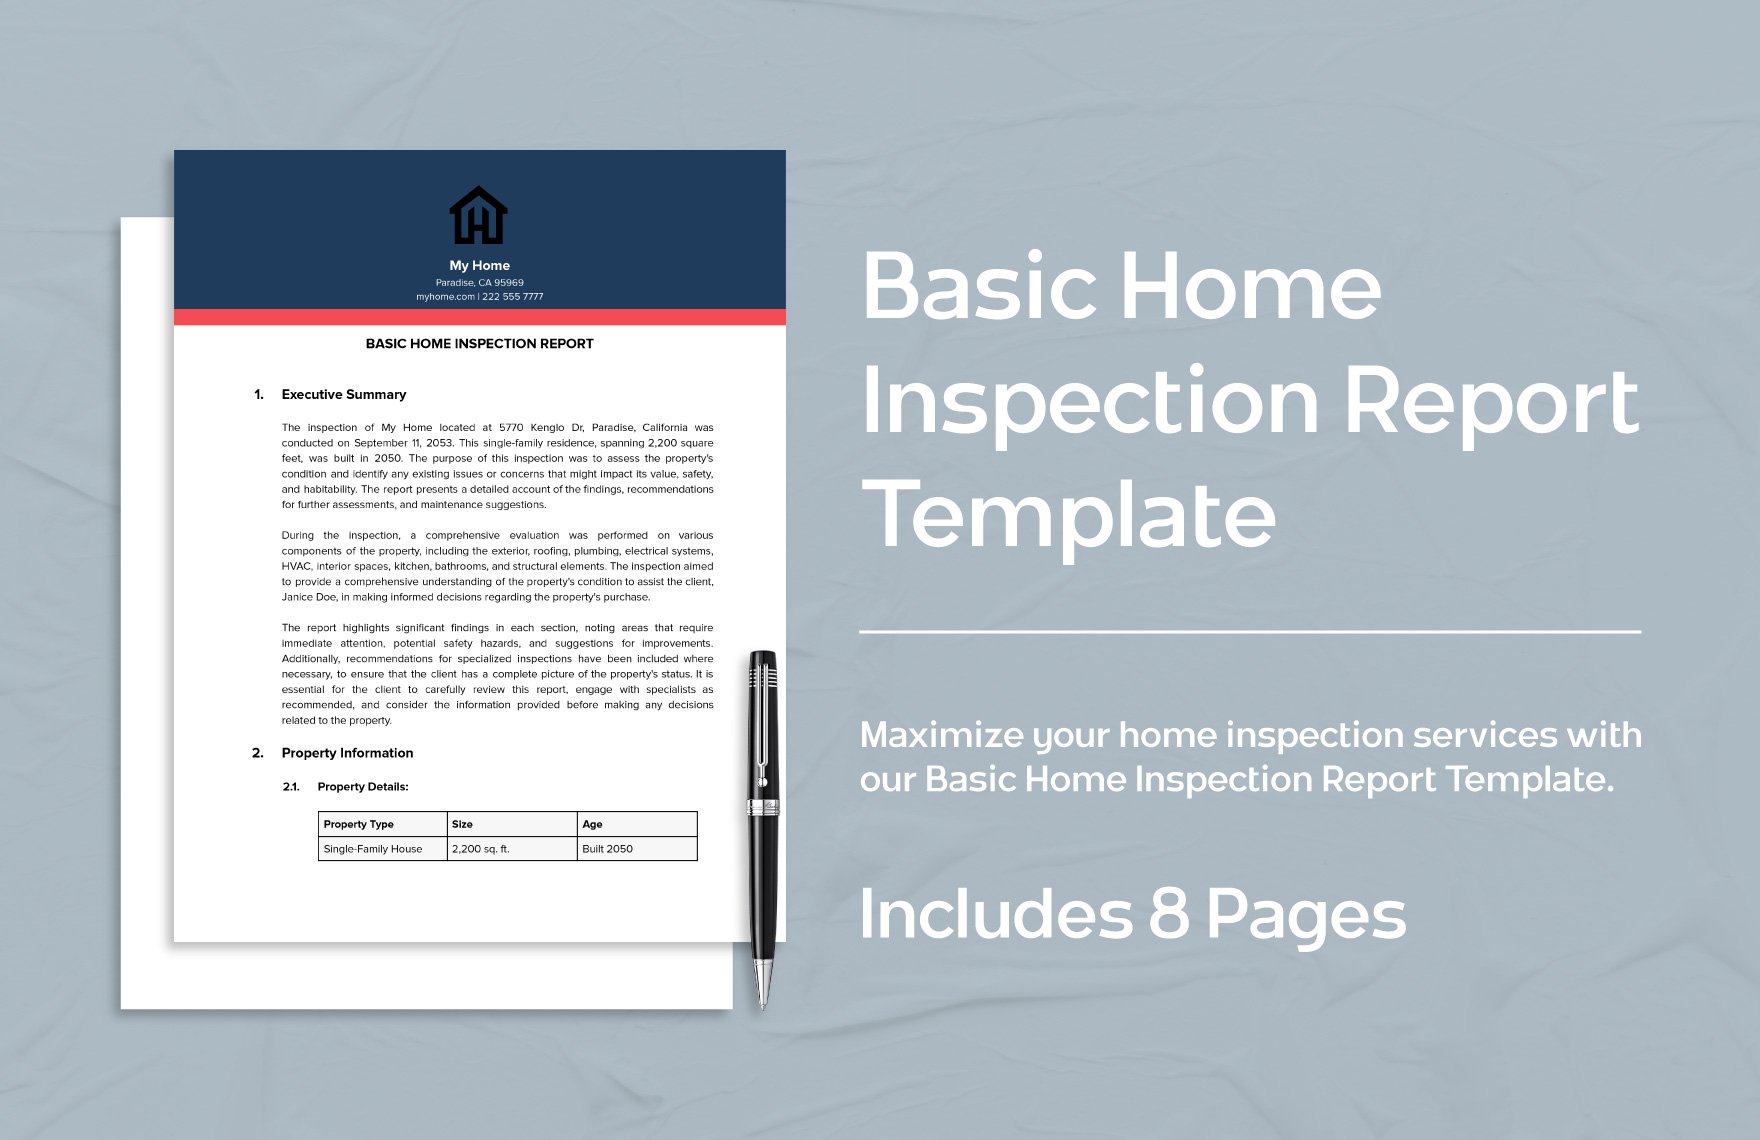 Basic Home Inspection Report Template in Word, Google Docs, PDF